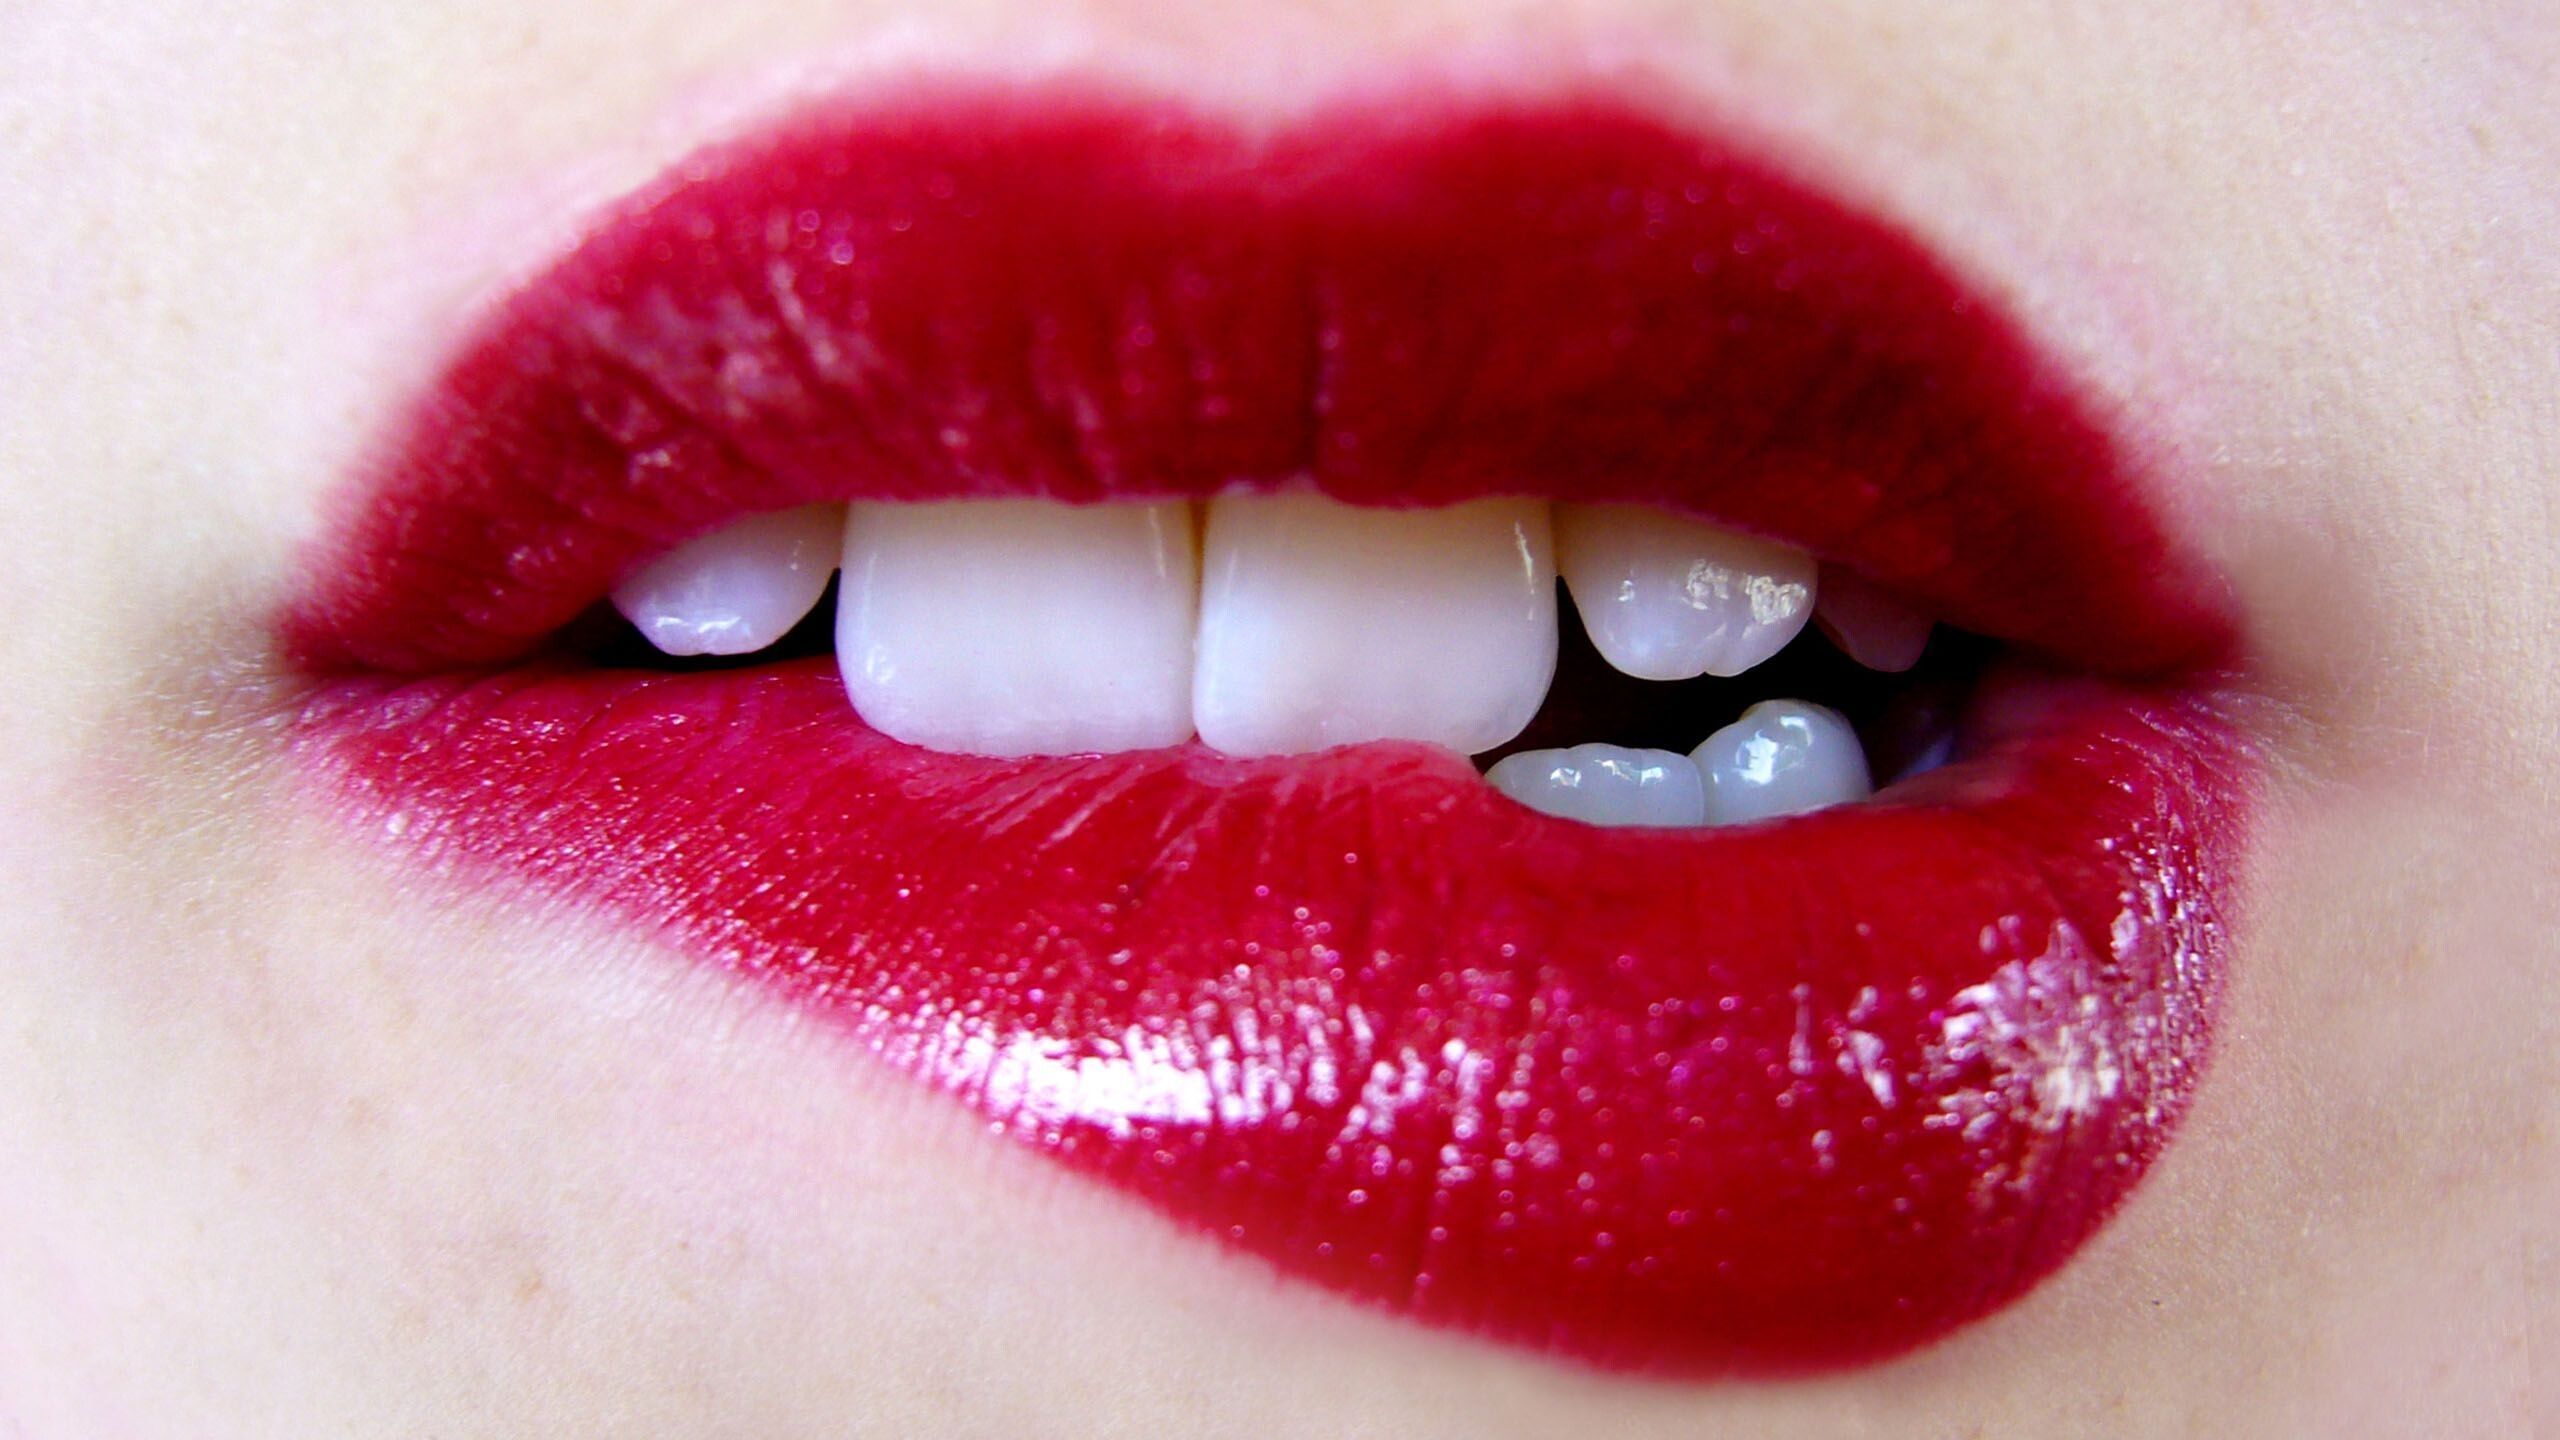 A woman's mouth with red lipstick on - Lips